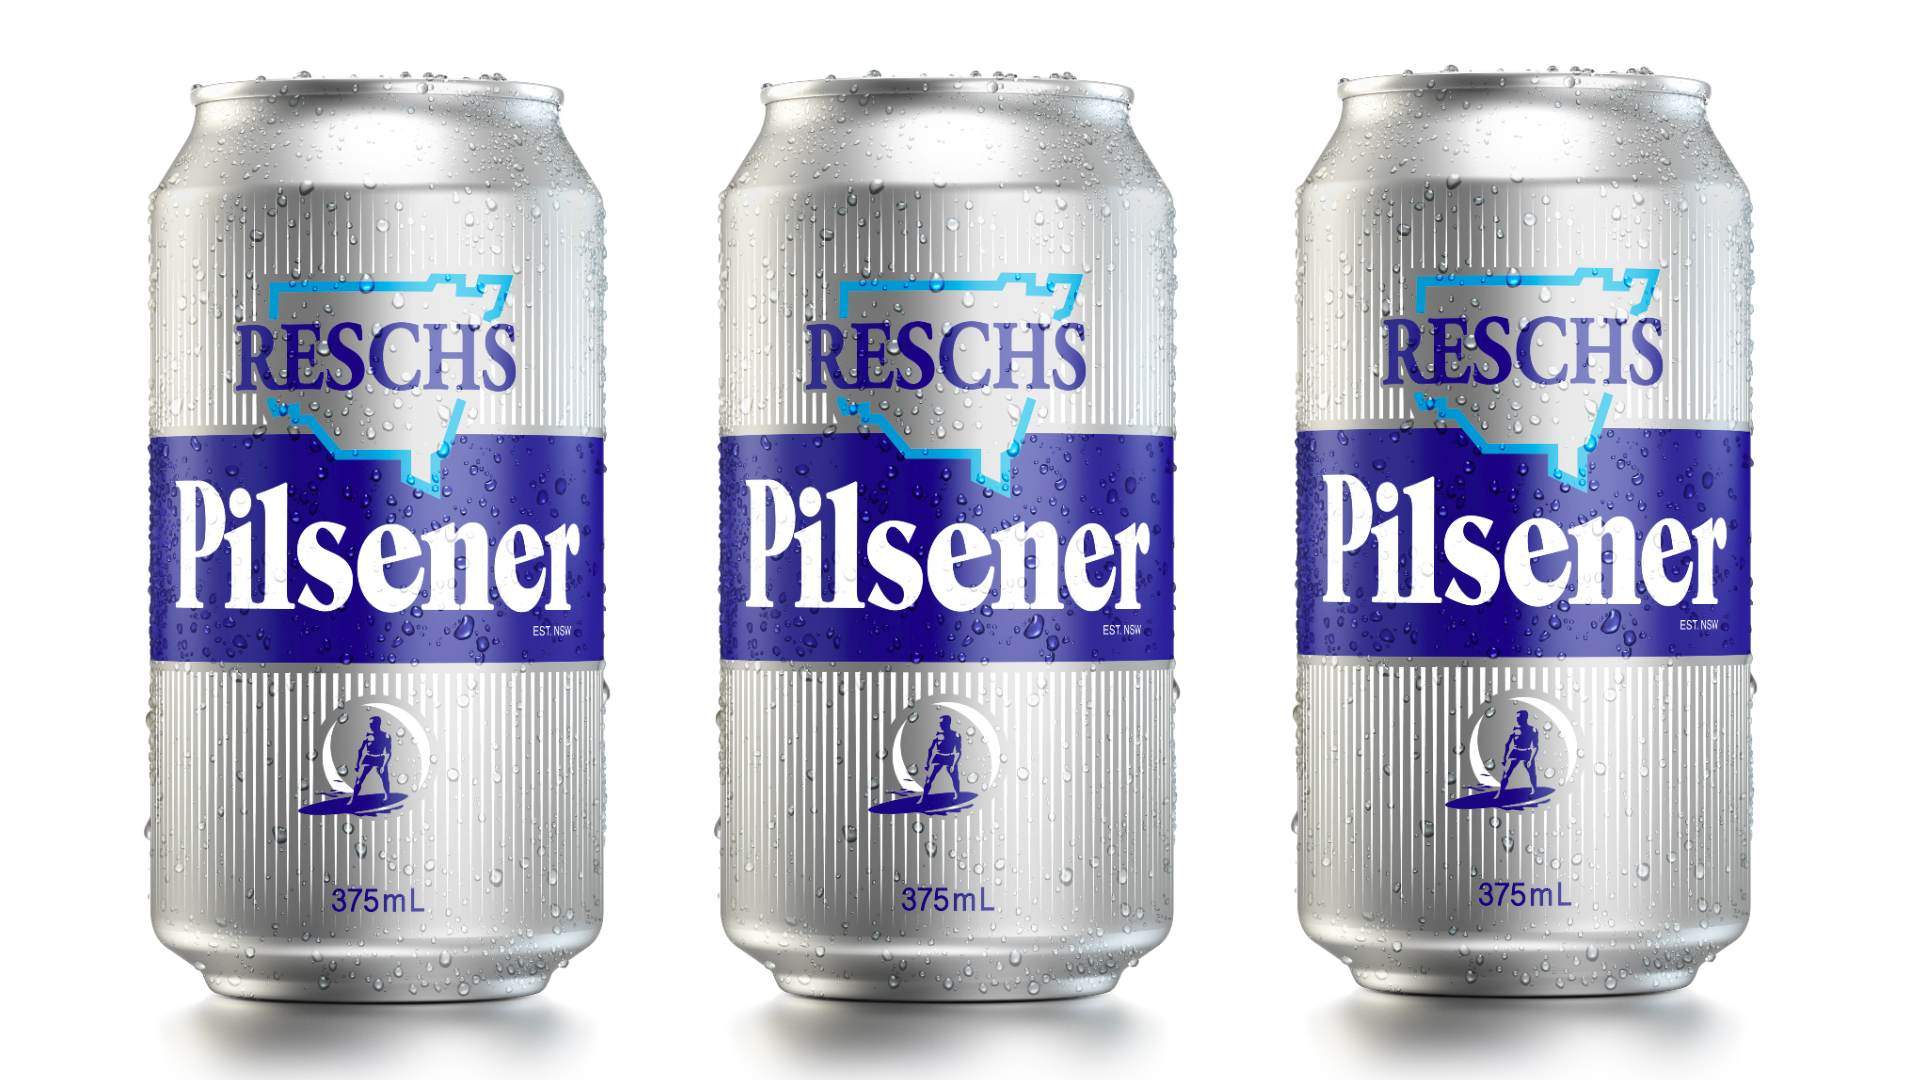 Reschs' Iconic Silver Bullet Pilsener Cans Have Made Their Long-Awaited Comeback